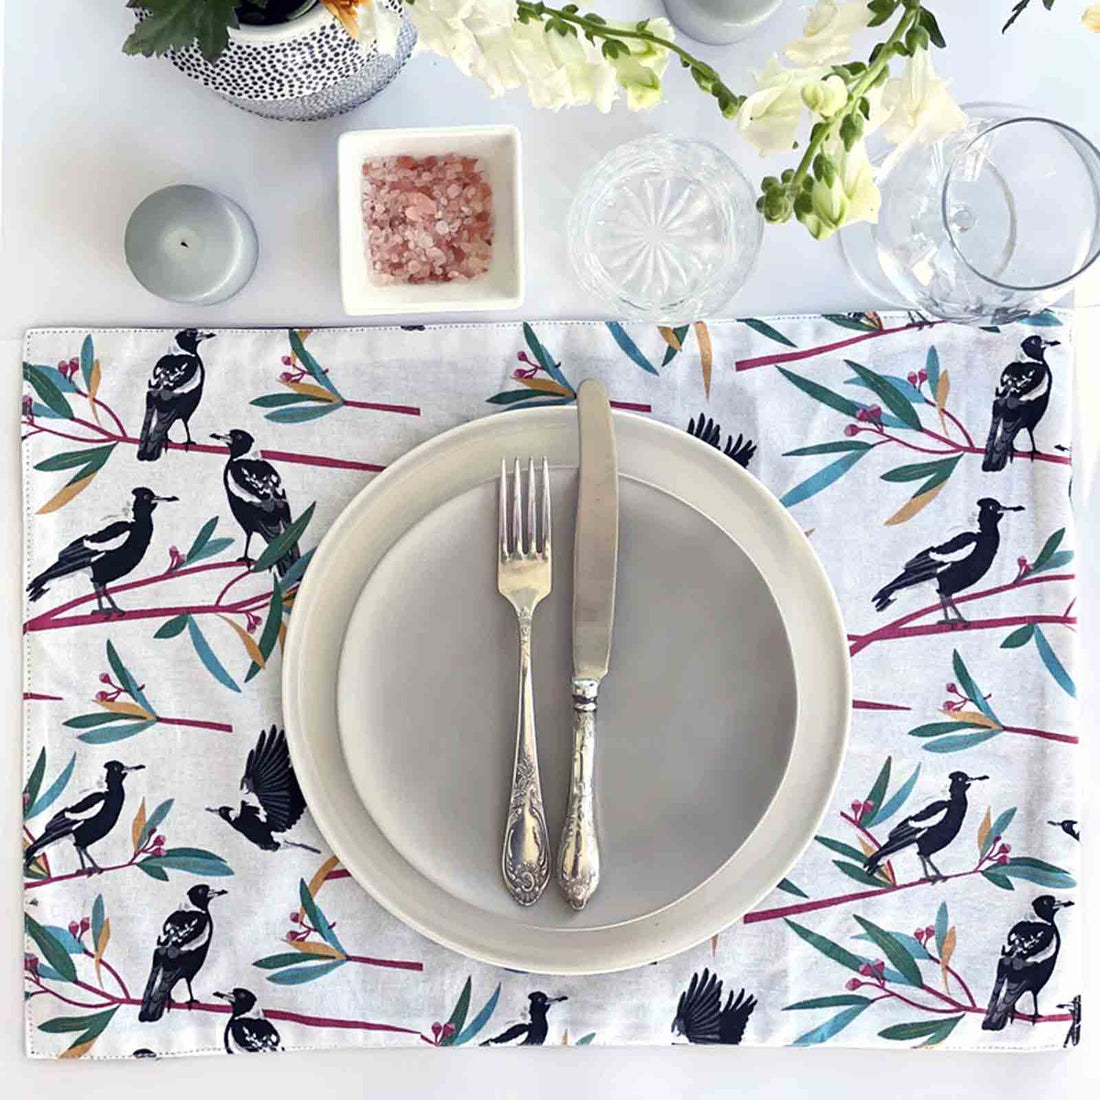 Magpies 100% Cotton Fabric Placemat - Set of 4